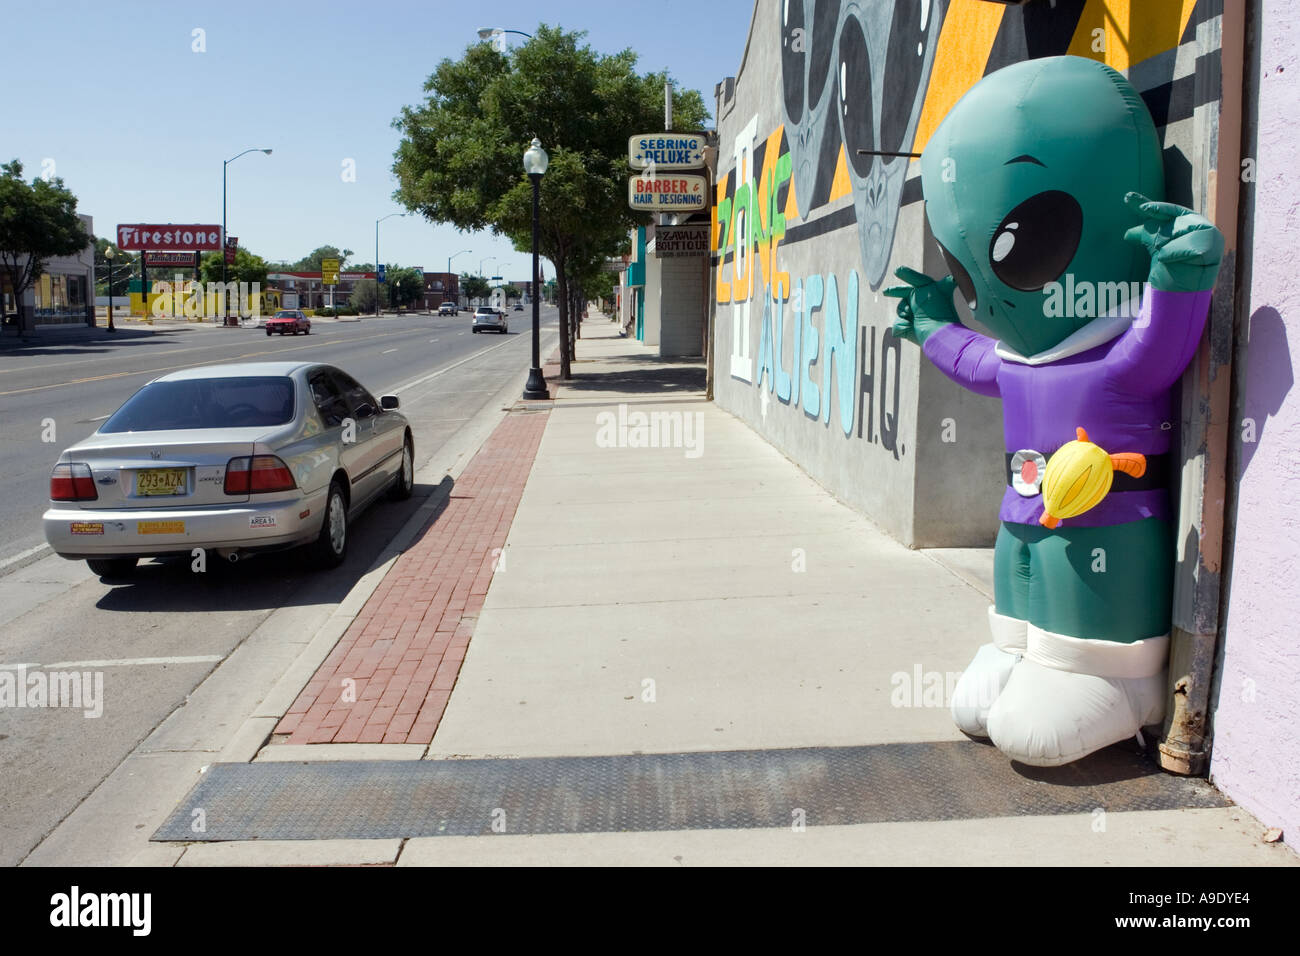 An inflatable alien character greets visitors to a store in Roswell New Mexico Stock Photo